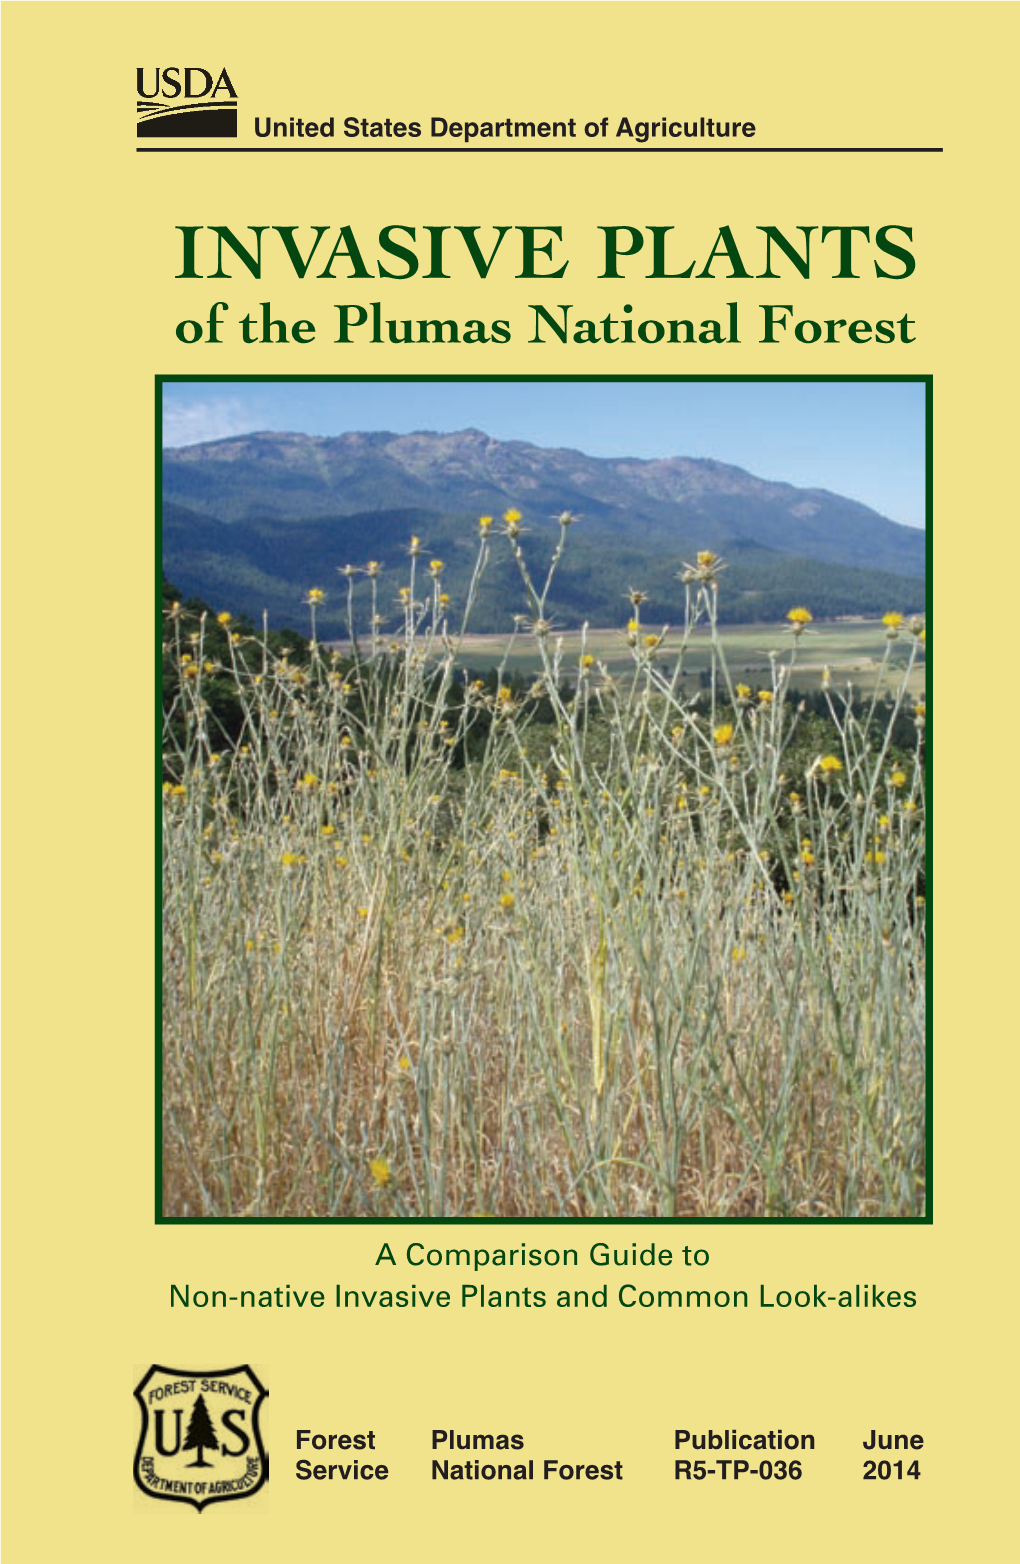 INVASIVE PLANTS of the Plumas National Forest